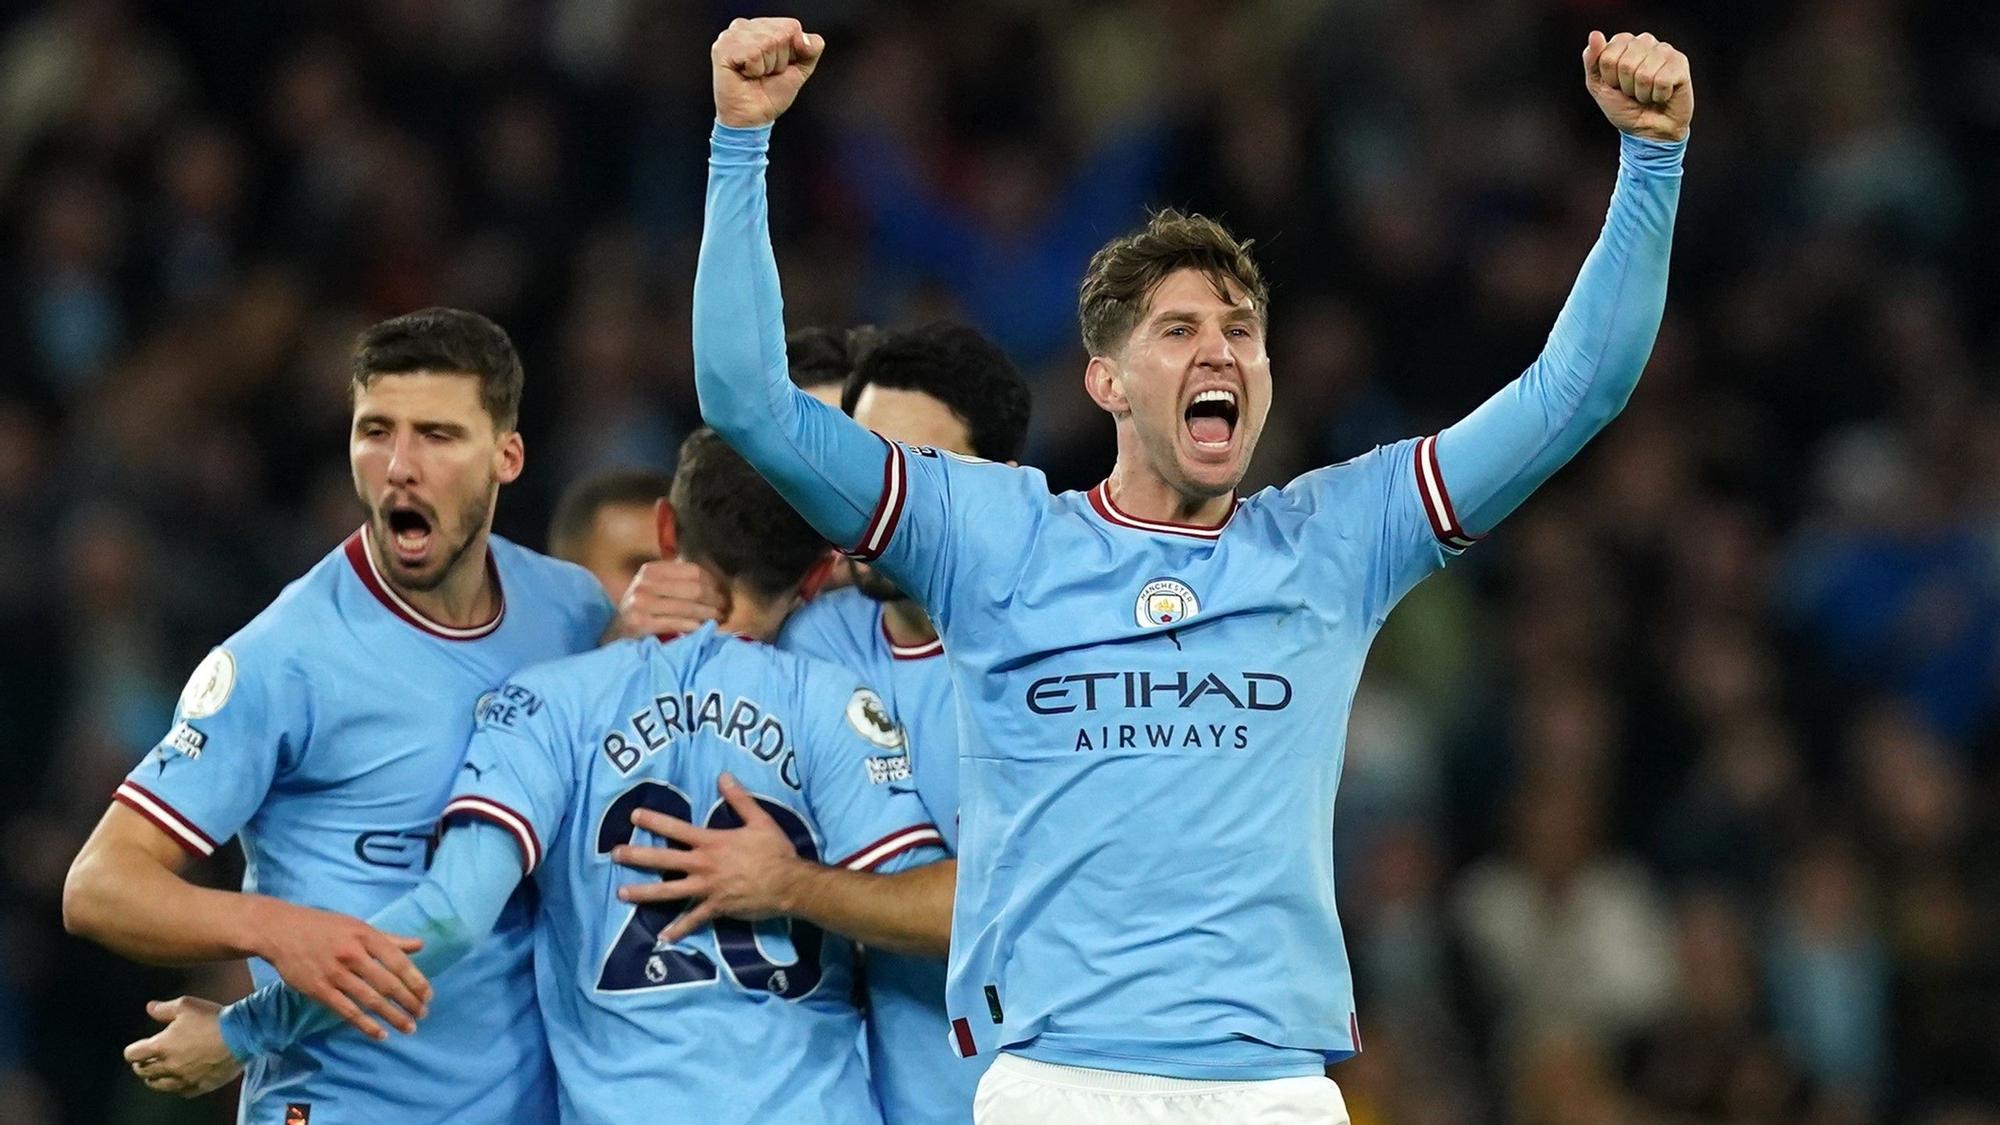 26 April 2023, United Kingdom, Manchester: Manchester City's John Stones celebrates scoring his side's second goal during the English Premier League match between Manchester City and Arsenal at the Etihad Stadium. Photo: Martin Rickett/PA Wire/dpa